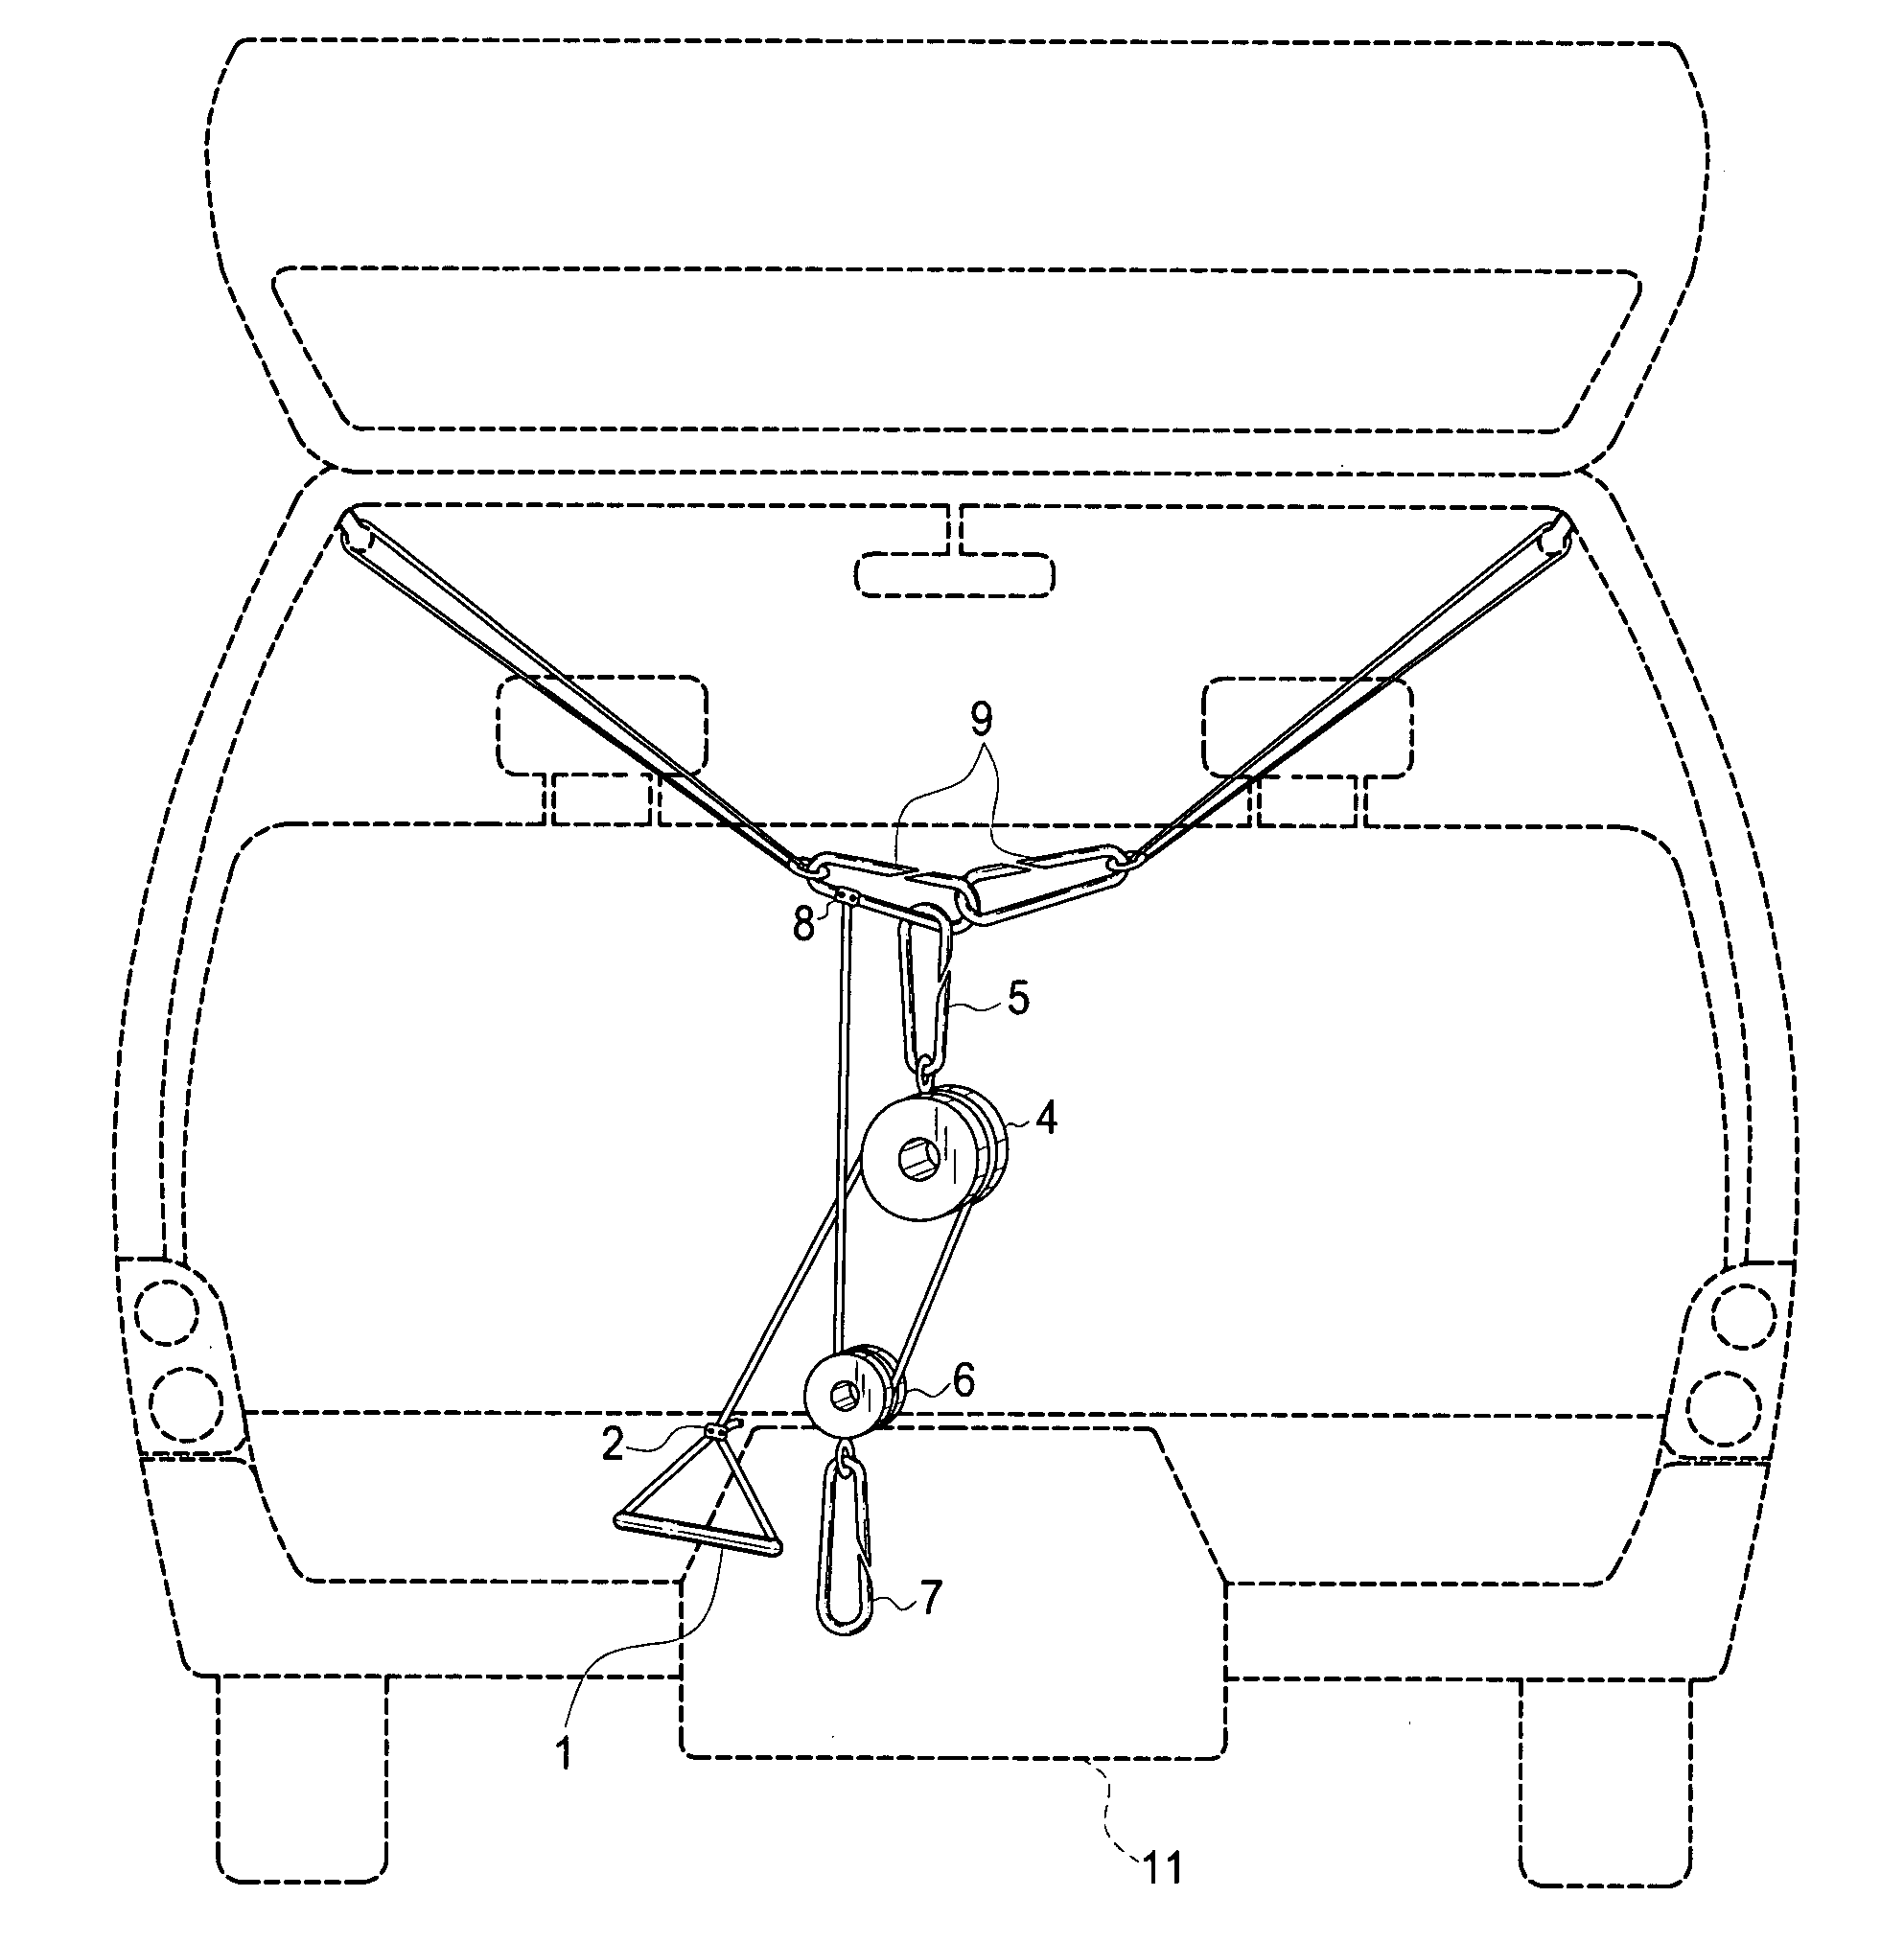 Apparatus and method to facilitate loading and unloading of passenger vehicle cargo